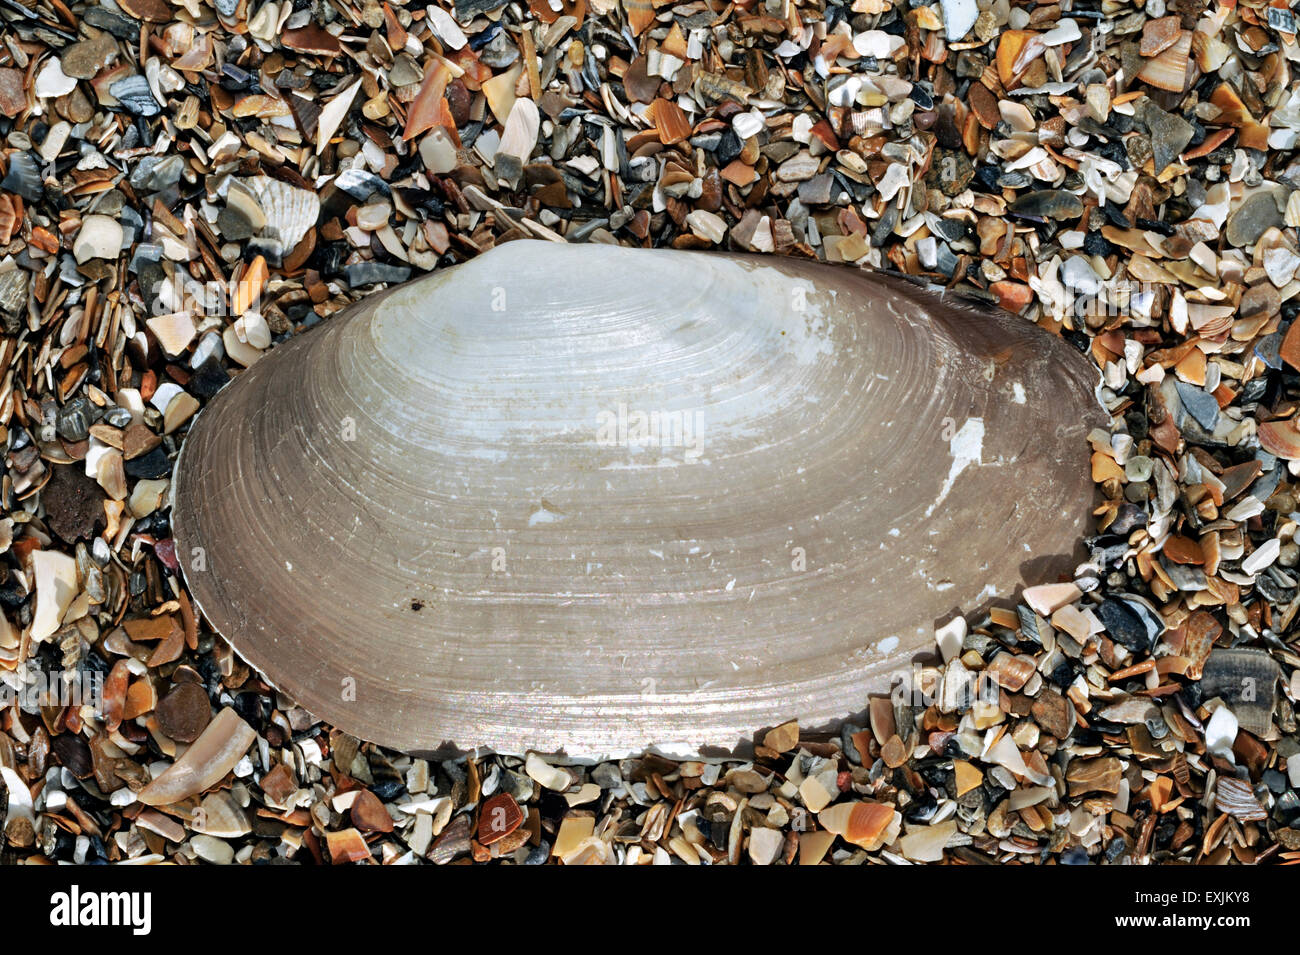 Common otter shell (Lutraria lutraria) washed on beach Stock Photo